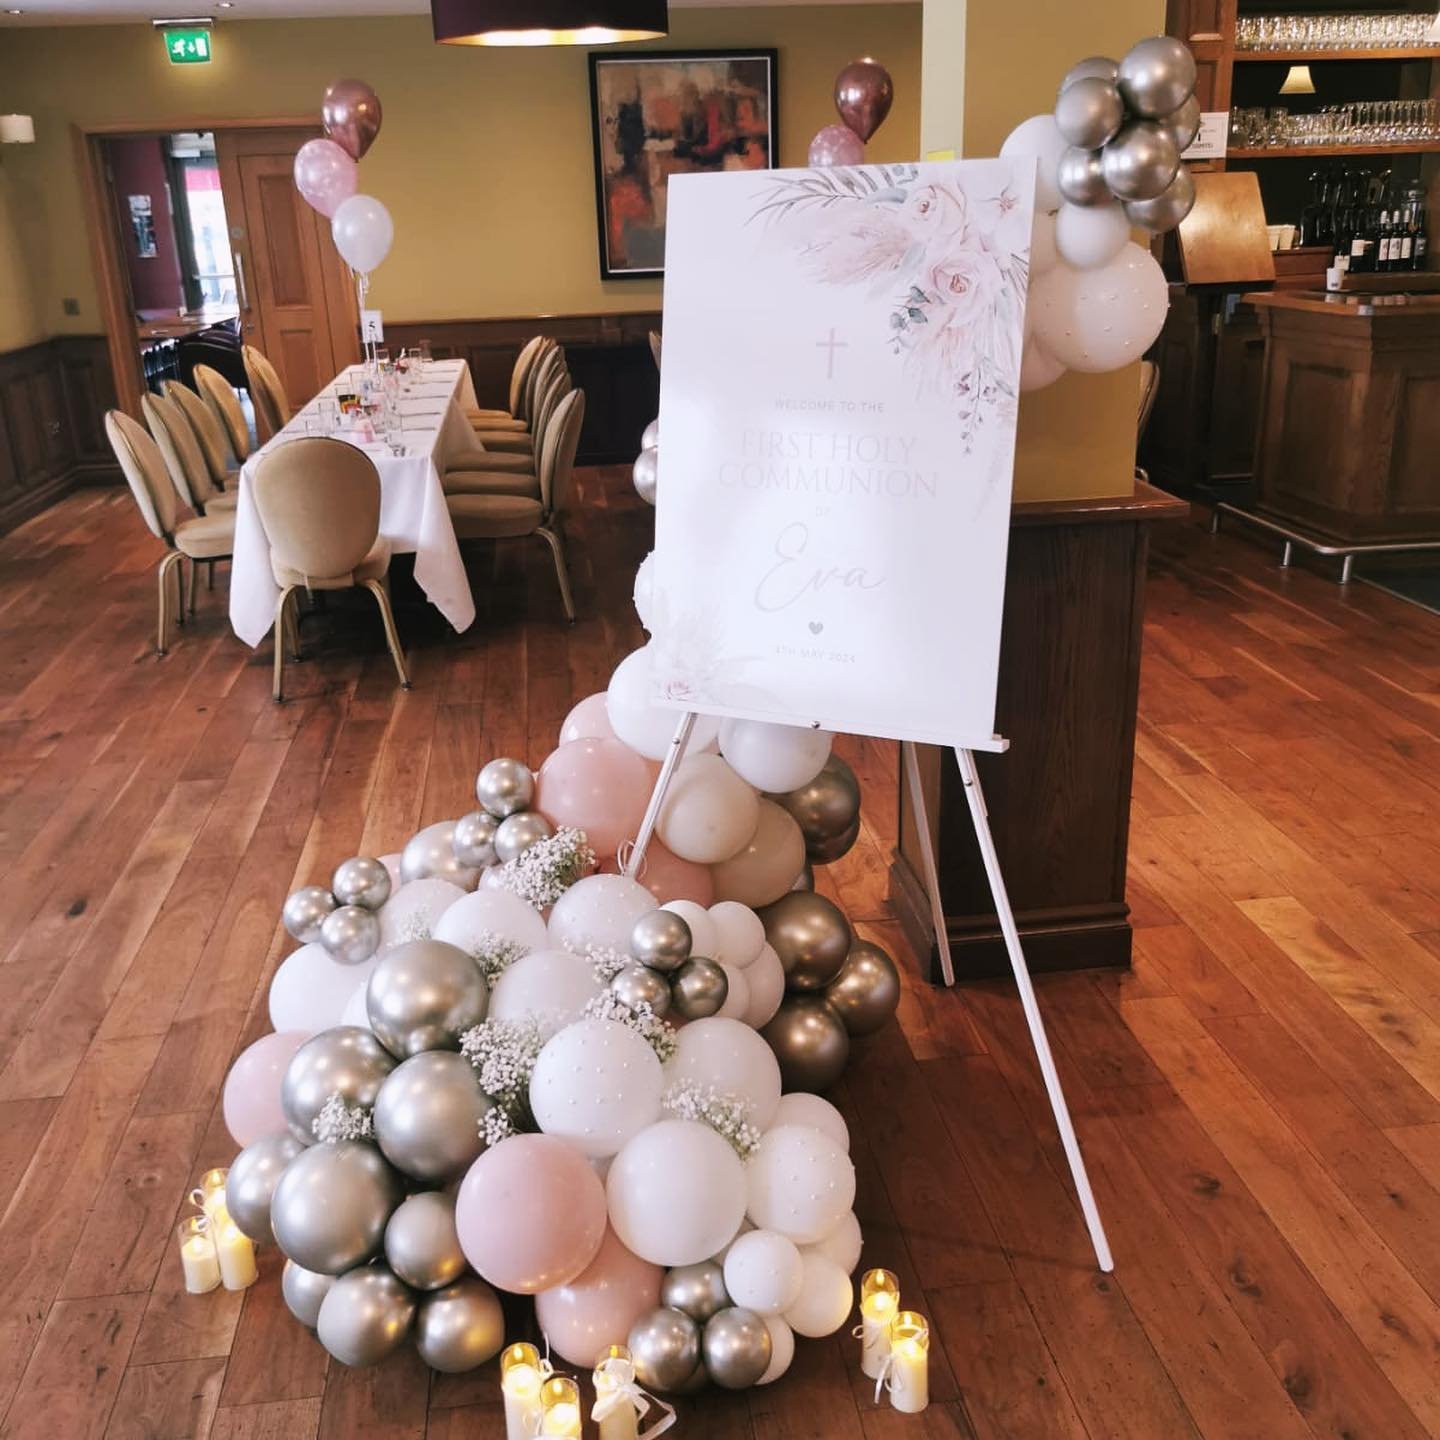 It&rsquo;s communion season! 💗 

Today is the start of our May Communion Madness 💗 

We&rsquo;ve got balloonists and face painters for all the kids celebrating their first holy communion every weekend for the month of May 💐

If you&rsquo;re celebr